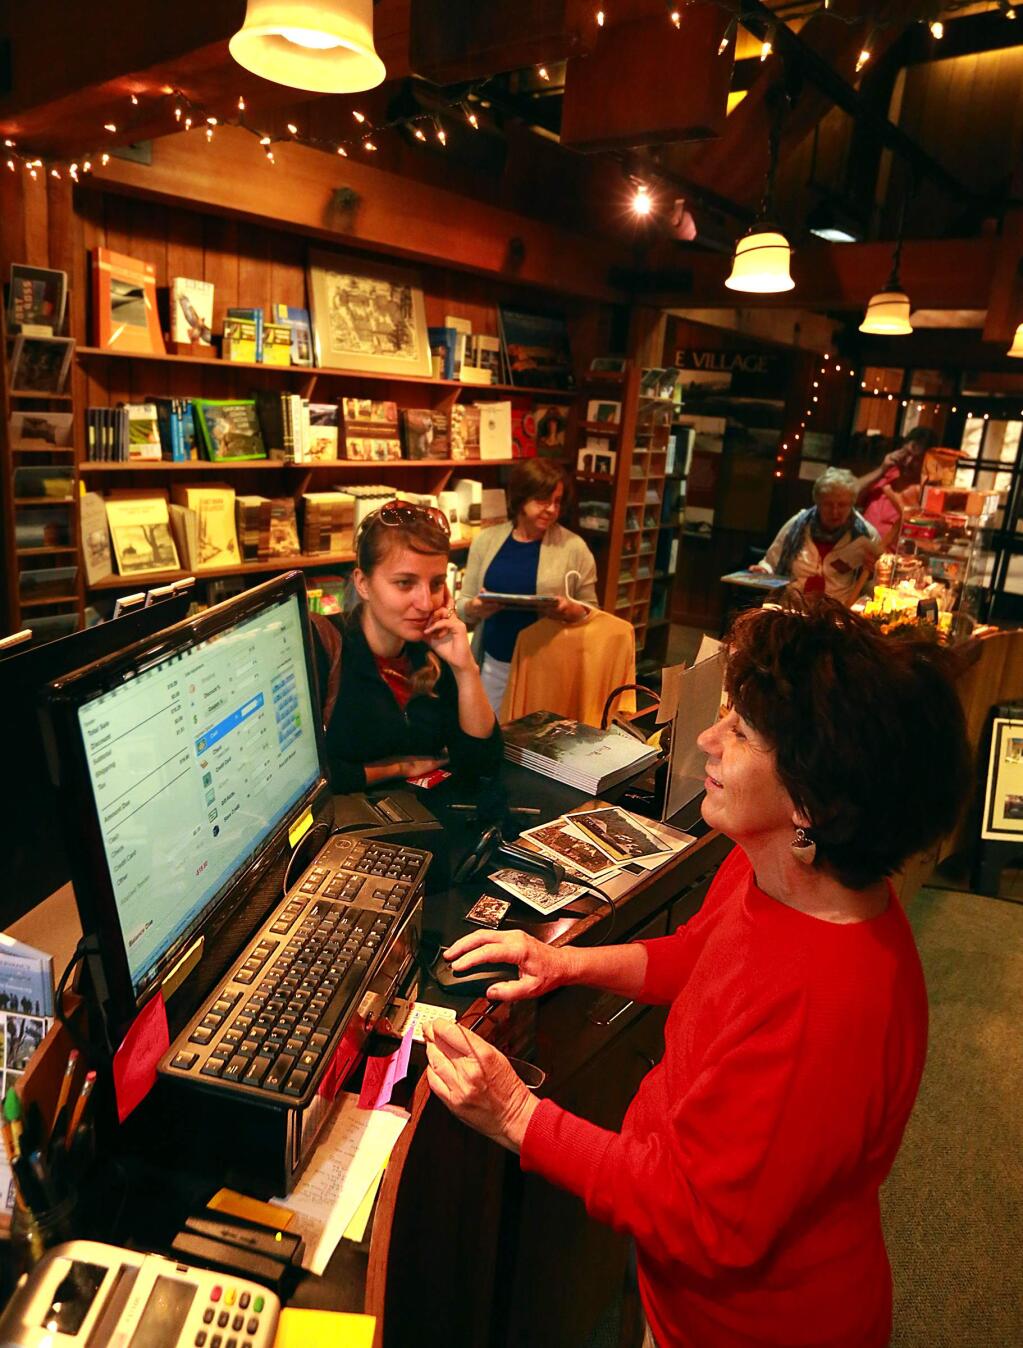 Ft. Ross operations manager Sarjan Holt uses a DSL Verizon line to operate the computer in the gift shop of the historic Russian fort north of Jenner. Visitors find the area a black hole of cell coverage and connection to the Internet. (The Press Democrat)